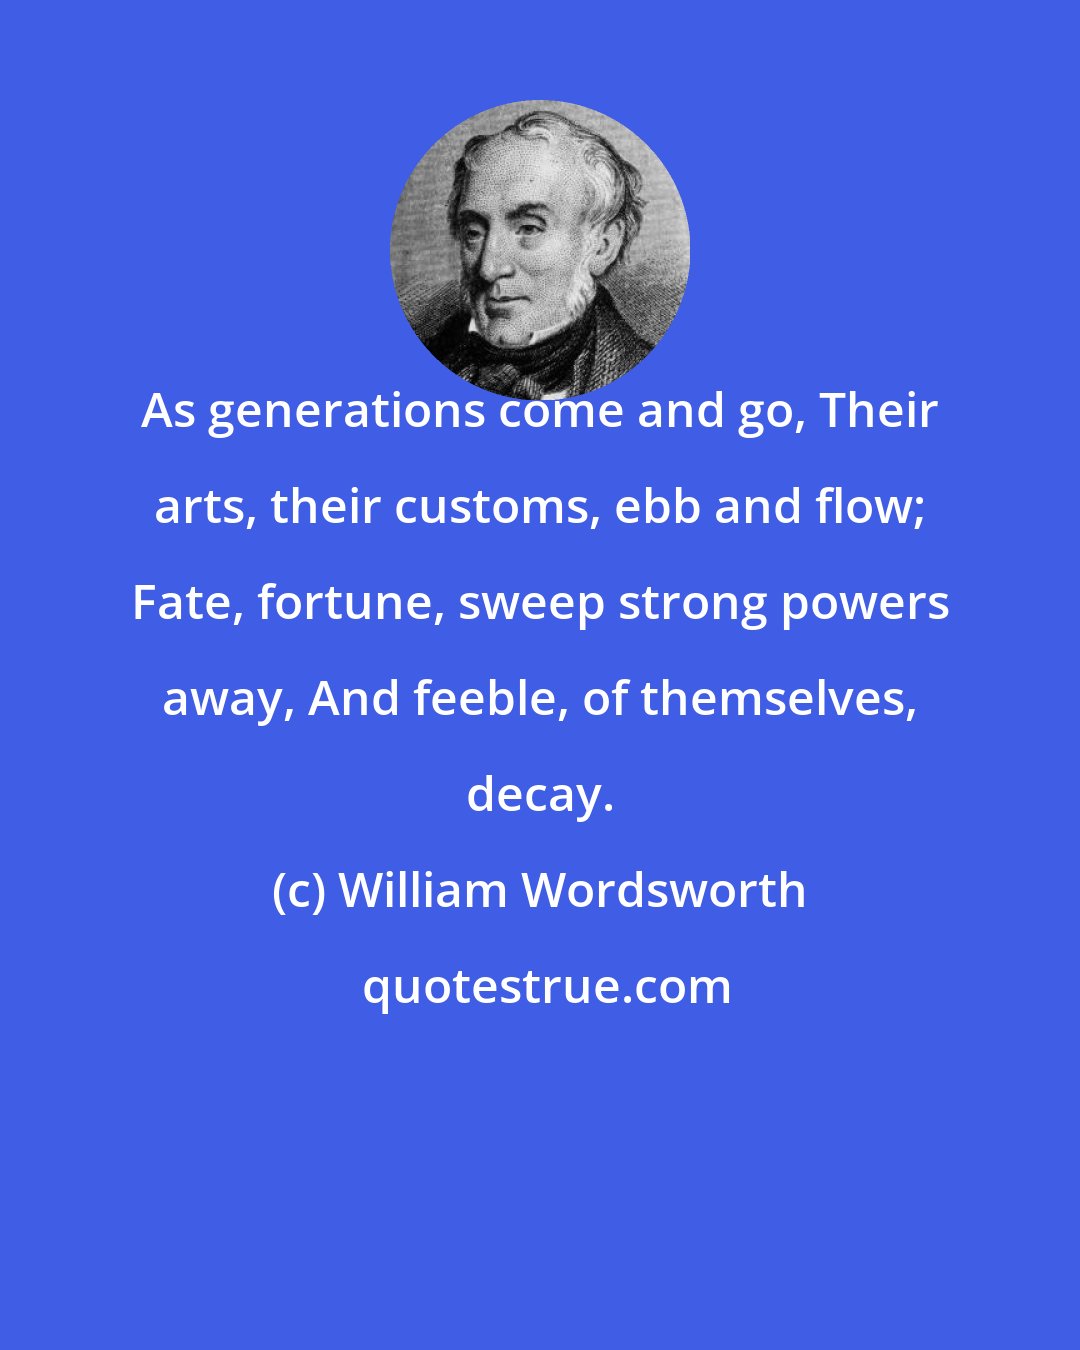 William Wordsworth: As generations come and go, Their arts, their customs, ebb and flow; Fate, fortune, sweep strong powers away, And feeble, of themselves, decay.